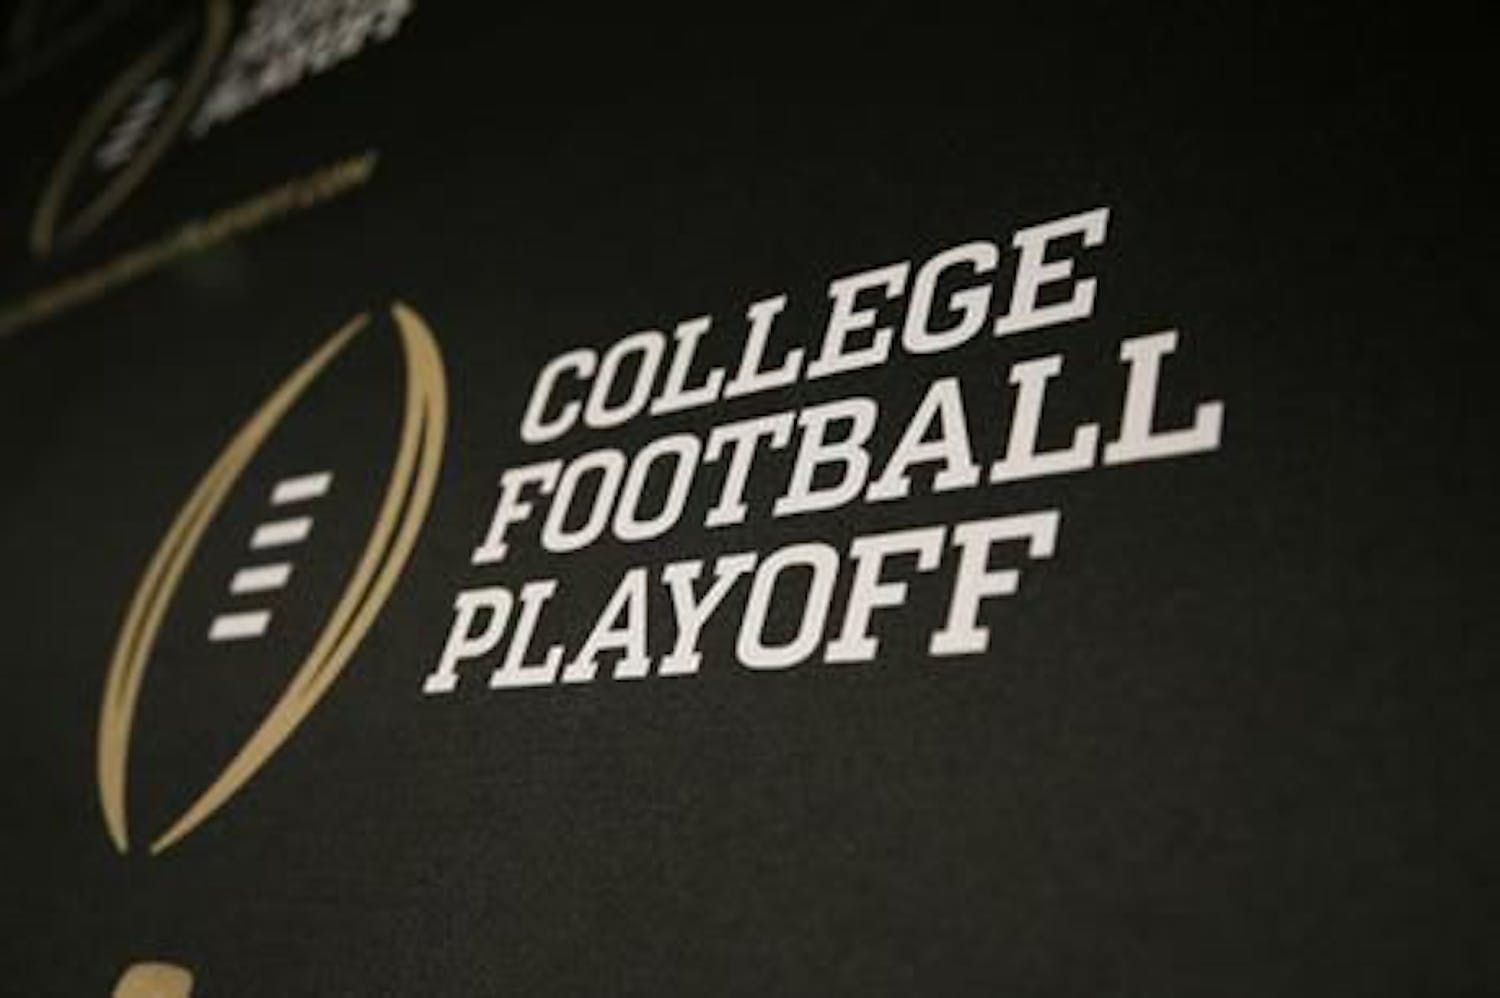 This Oct. 16, 2013 photo shows the College Football Playoff logo printed across a backdrop used during a news conference in Irving, Texas. (AP Photo/Tony Gutierrez)